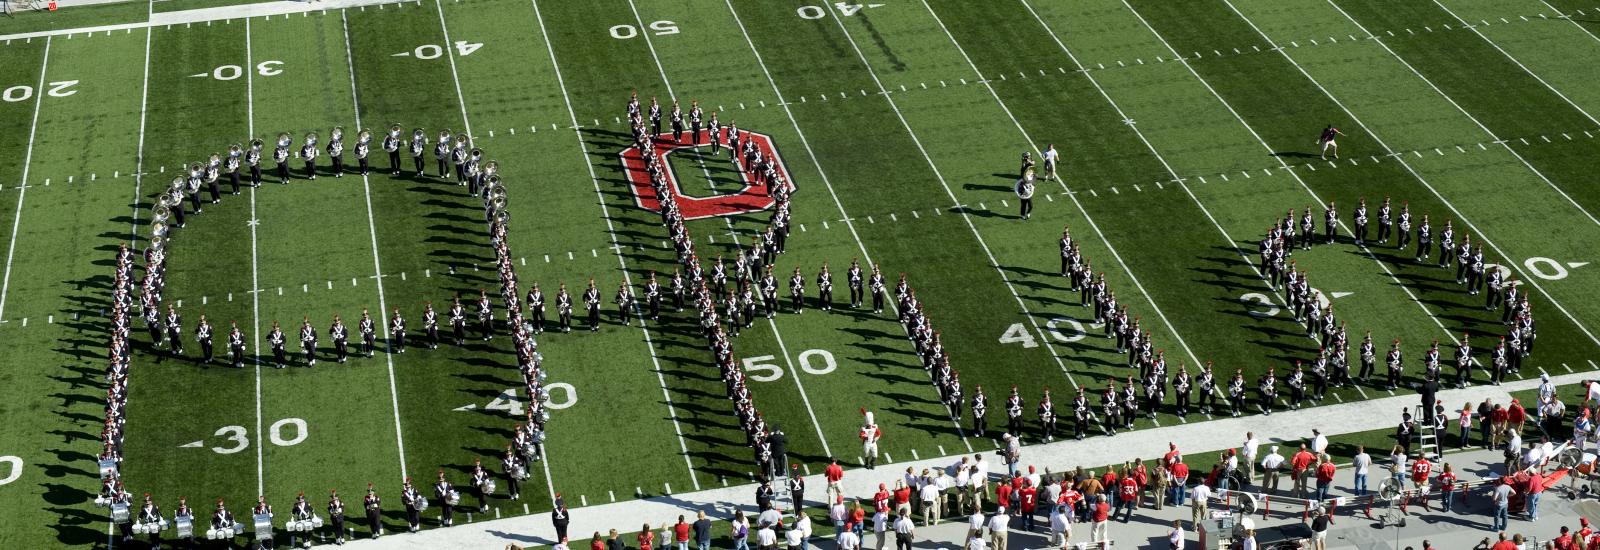 script ohio picture of marching band